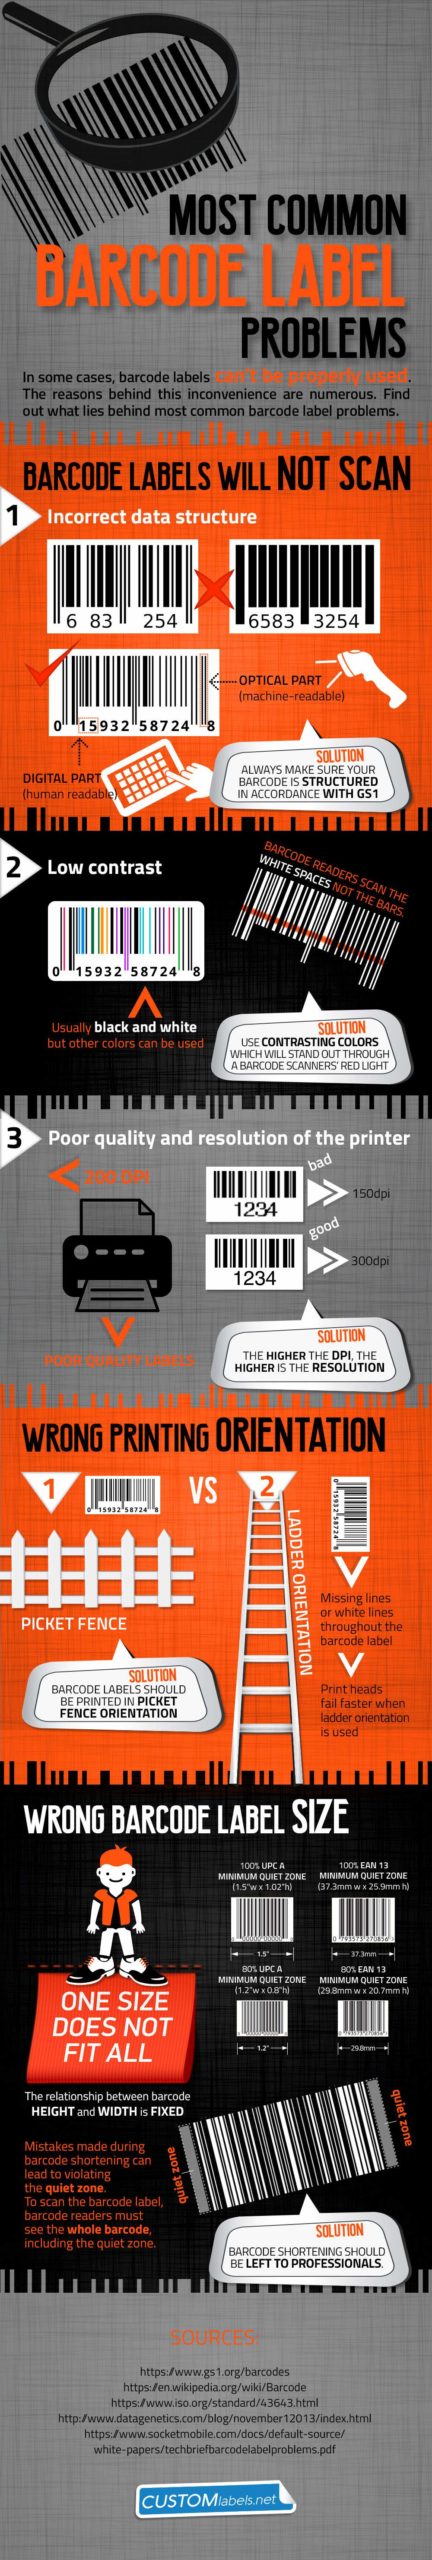 most-common-barcode-label-problems